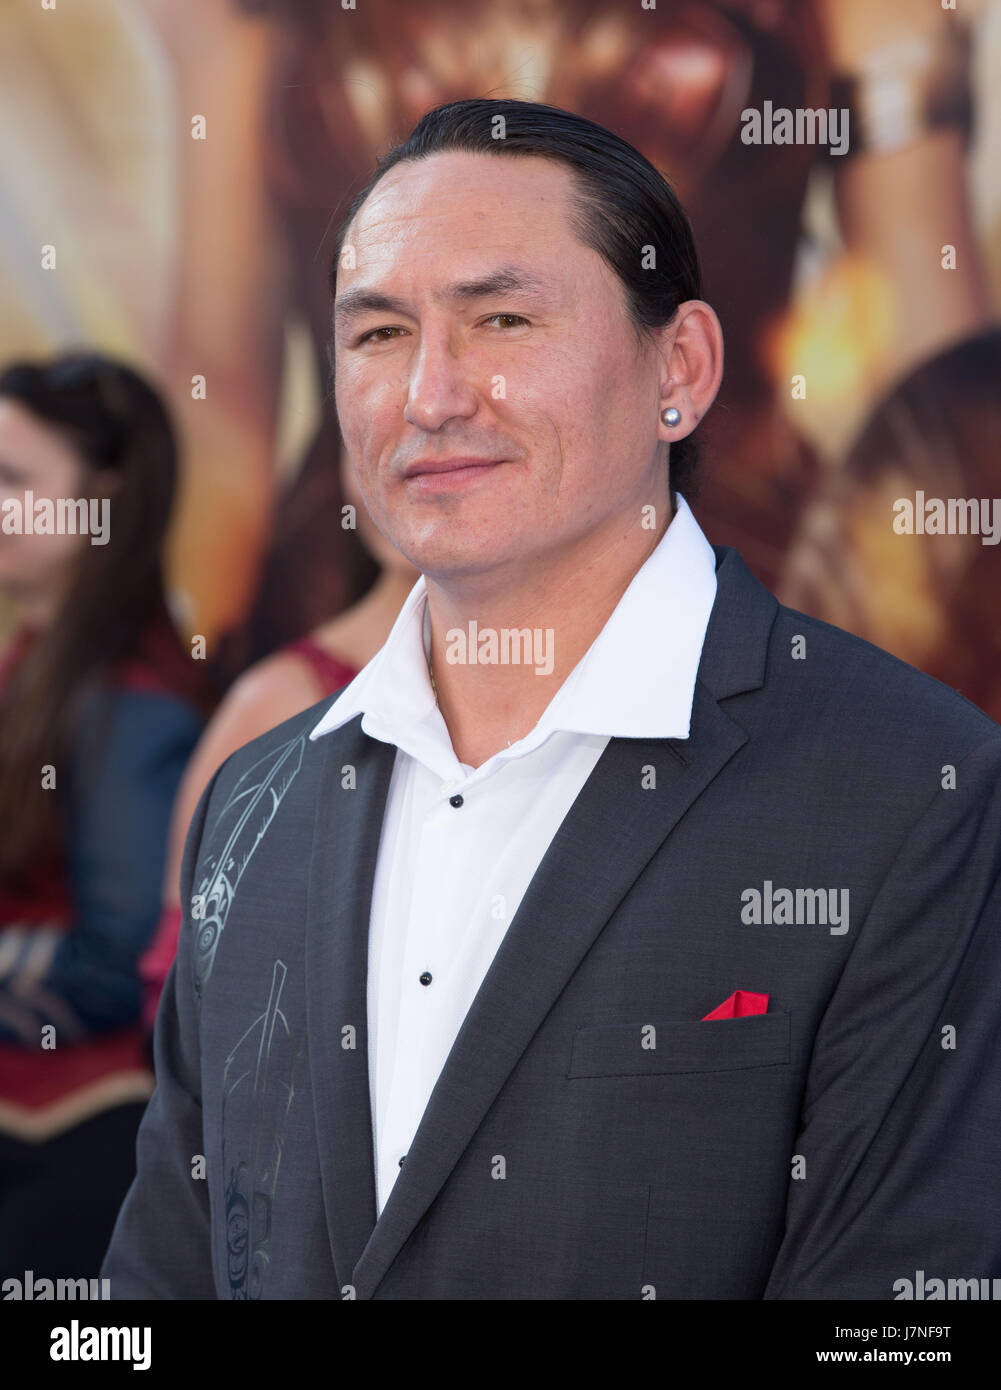 Hollywood, California, USA. 25th May, 2017. Eugene Brave Rock attends the Premiere of Warner Bros. Pictures' 'Wonder Woman' at the Pantages Theatre on May 25, 2017 in Hollywood, California. Credit: The Photo Access/Alamy Live News Stock Photo